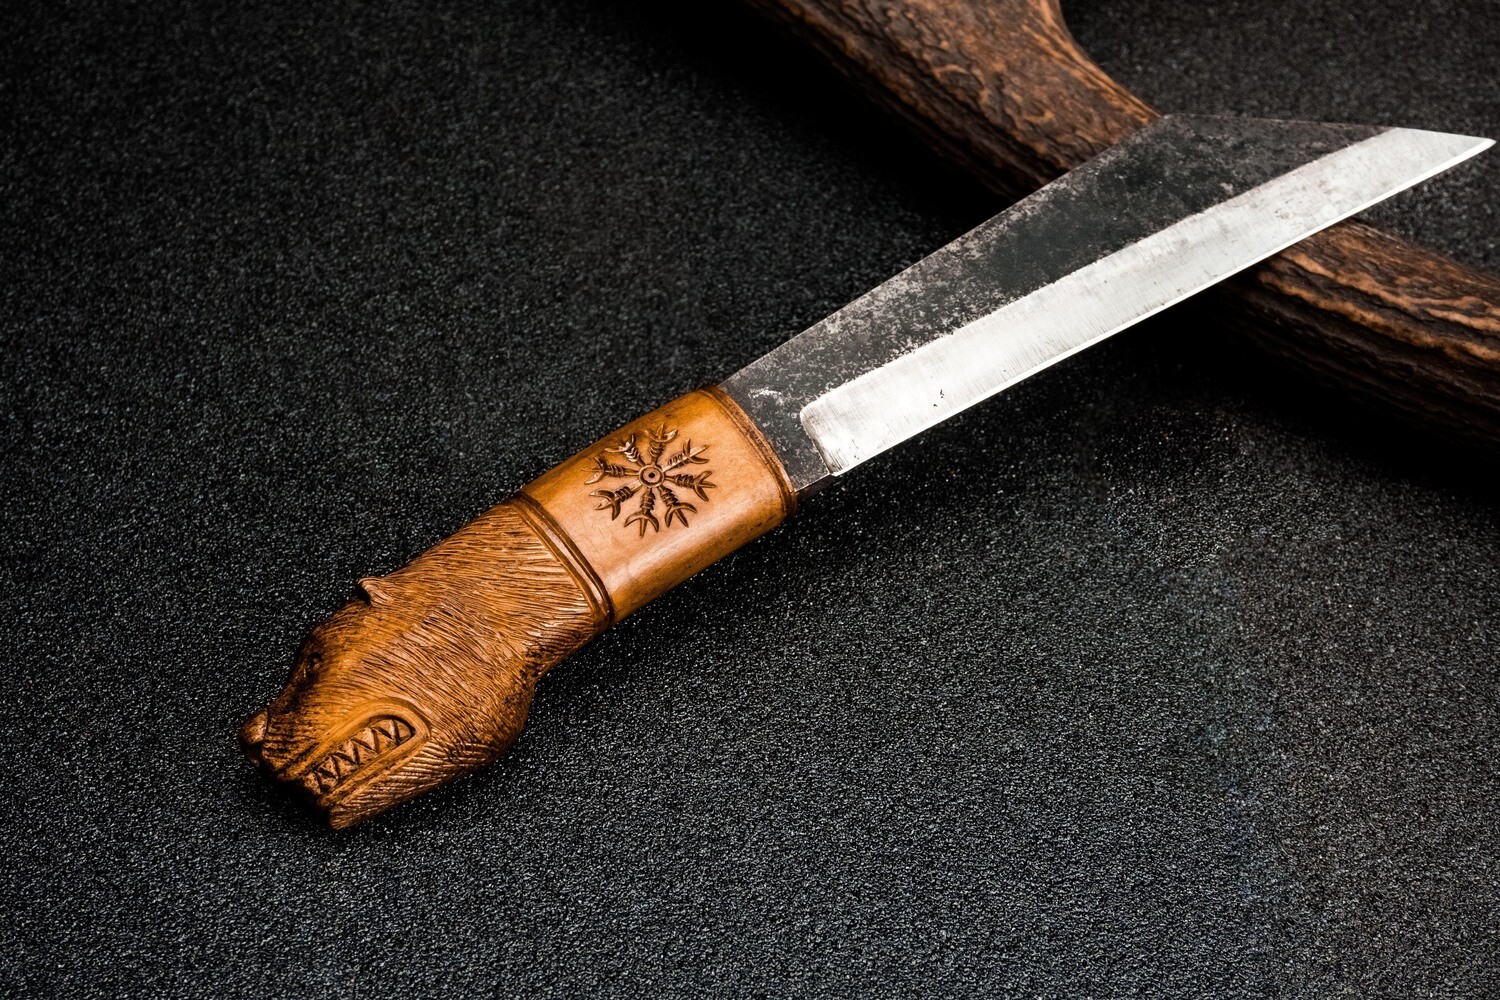 Anglo-Saxon Seax Dagger, Antlers Carved Handle (High Carbon Hand-Forged Steel Blade)